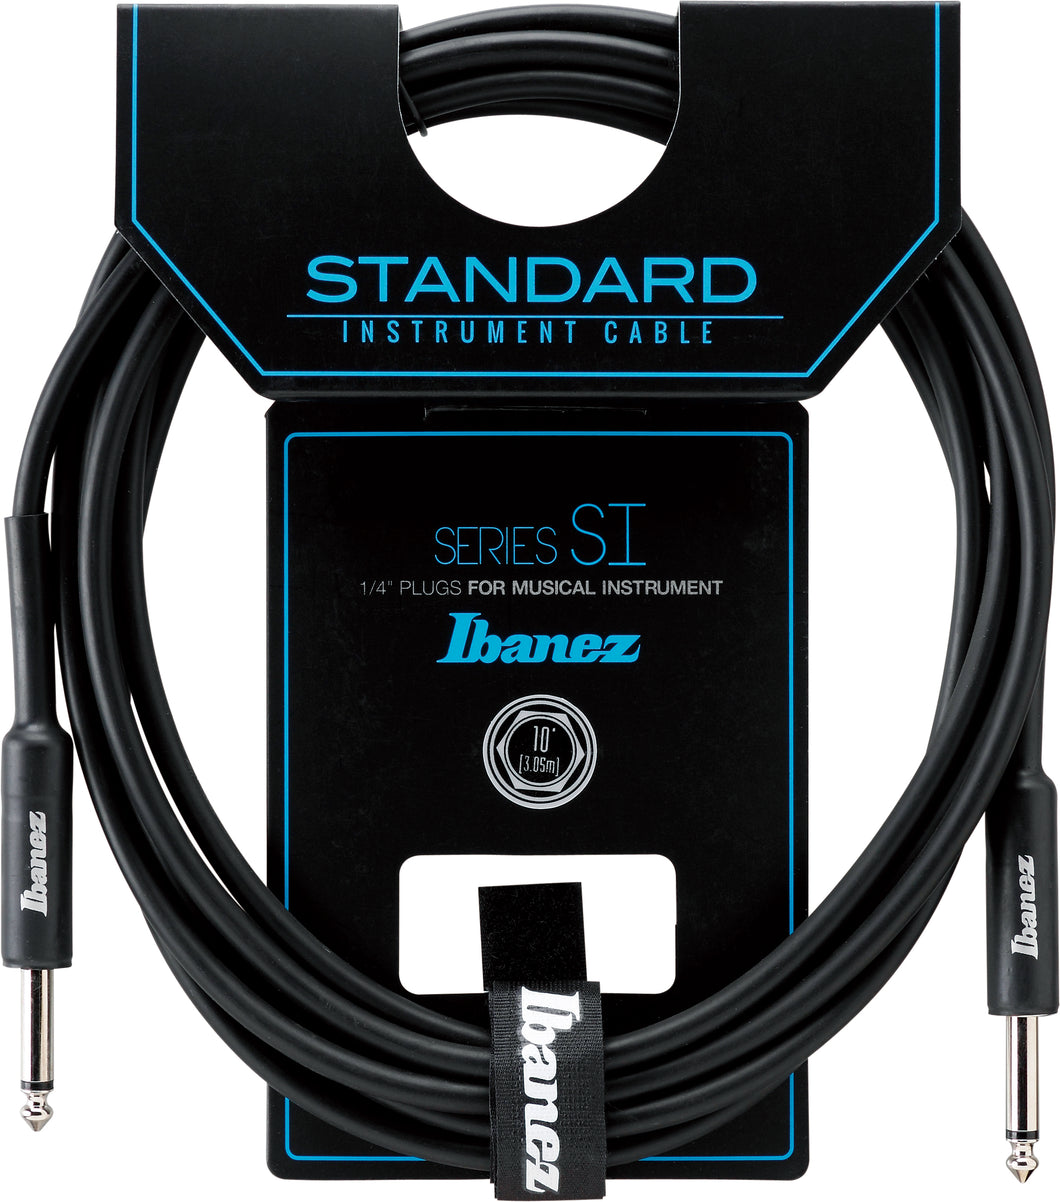 Ibanez SI10 Guitar Cable